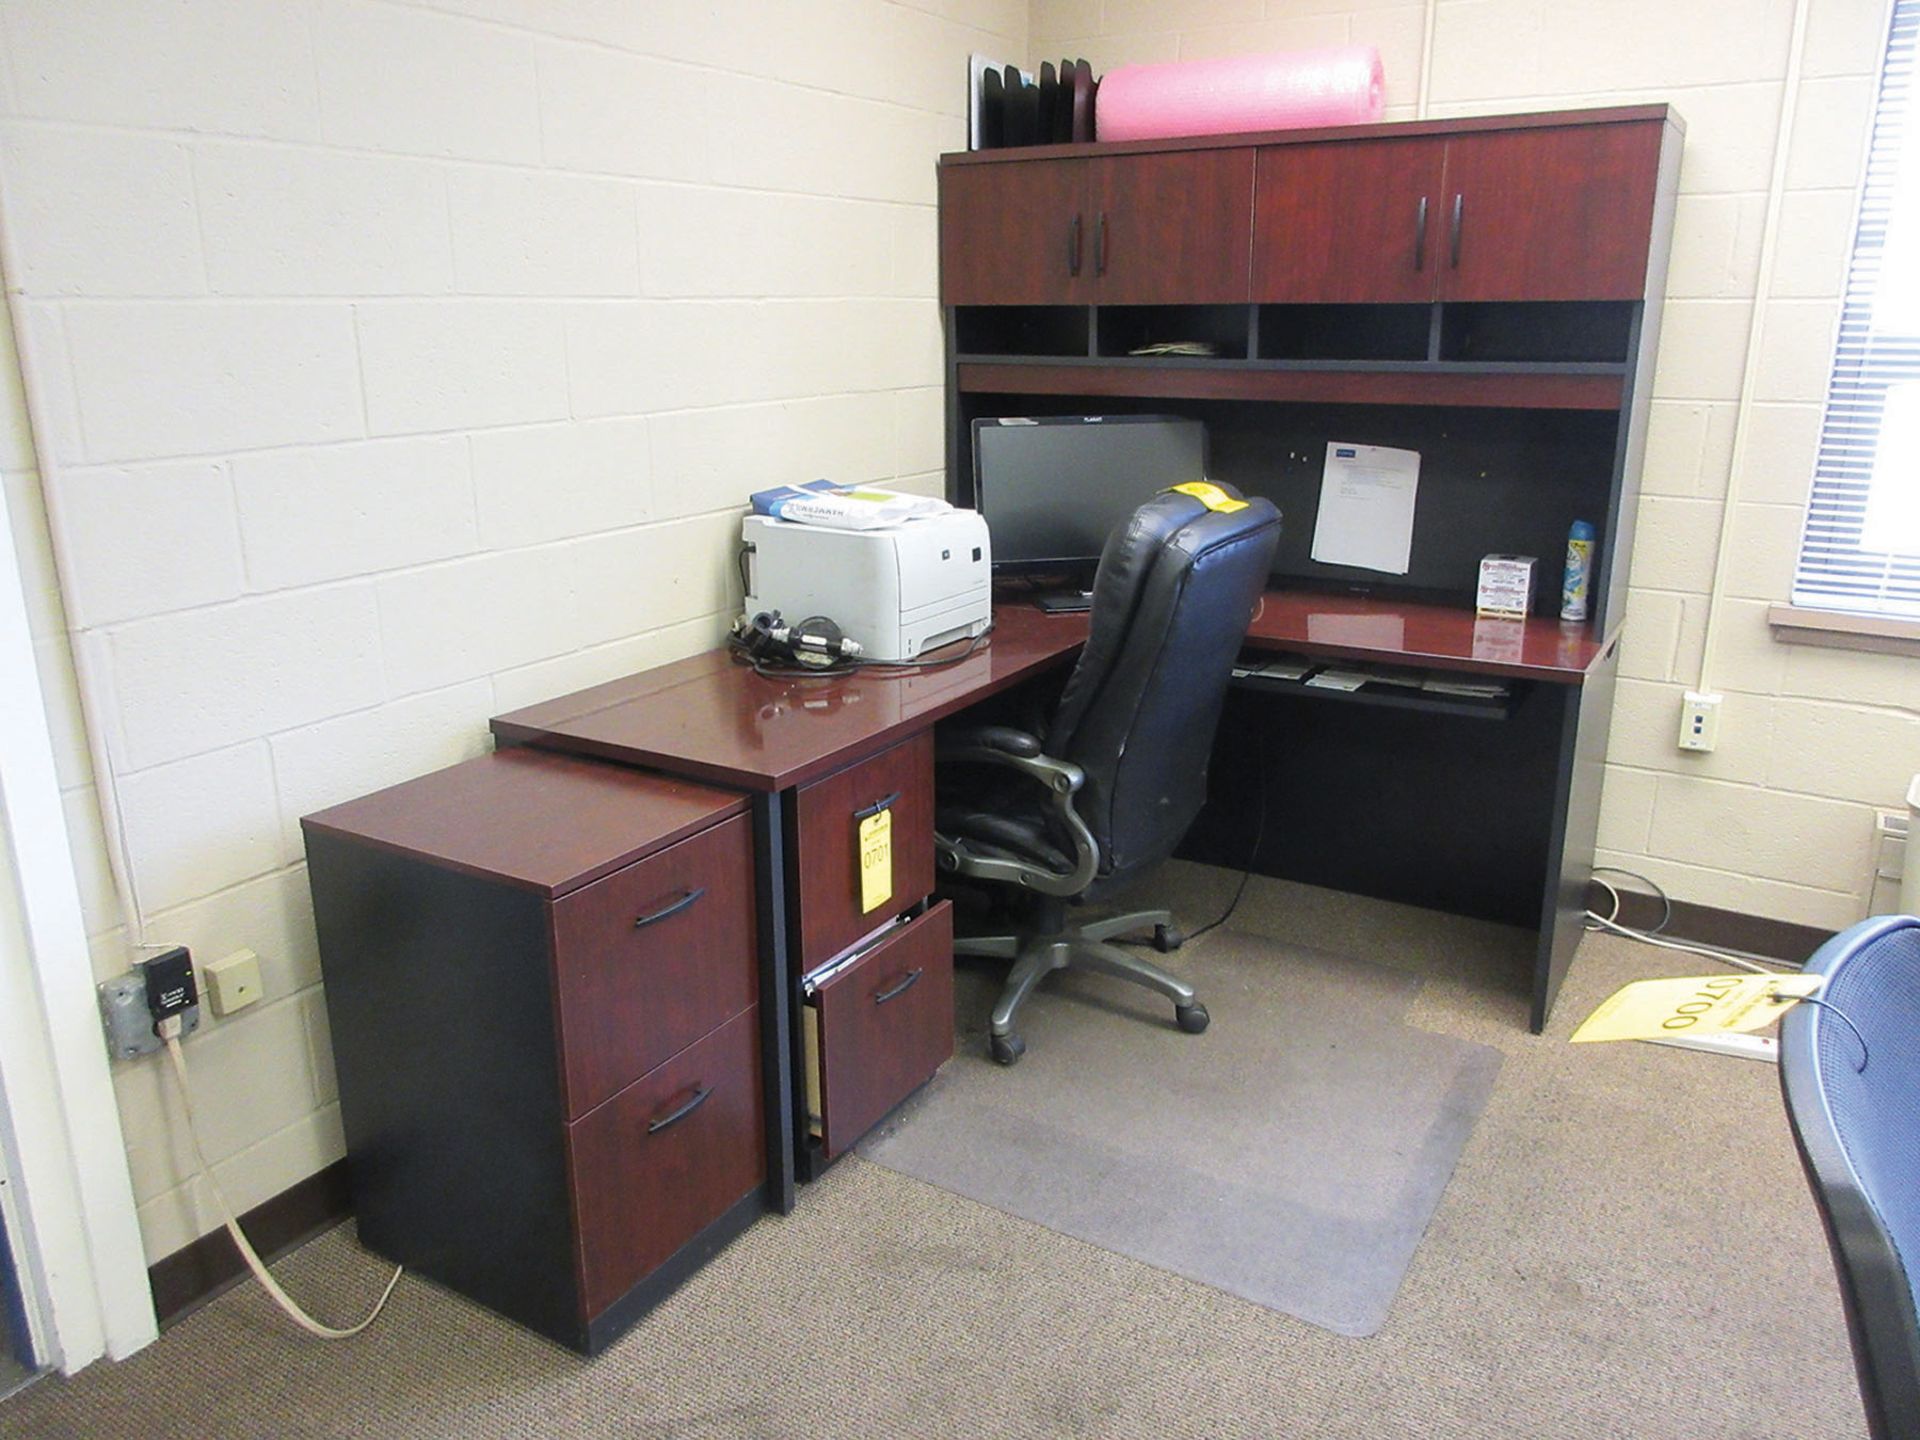 (3) CORNER DESKS, (3) CHAIRS, (1) LATERAL CABINETS, (1) 2-DOOR CABINET, PLANAR MONITOR, AND HP